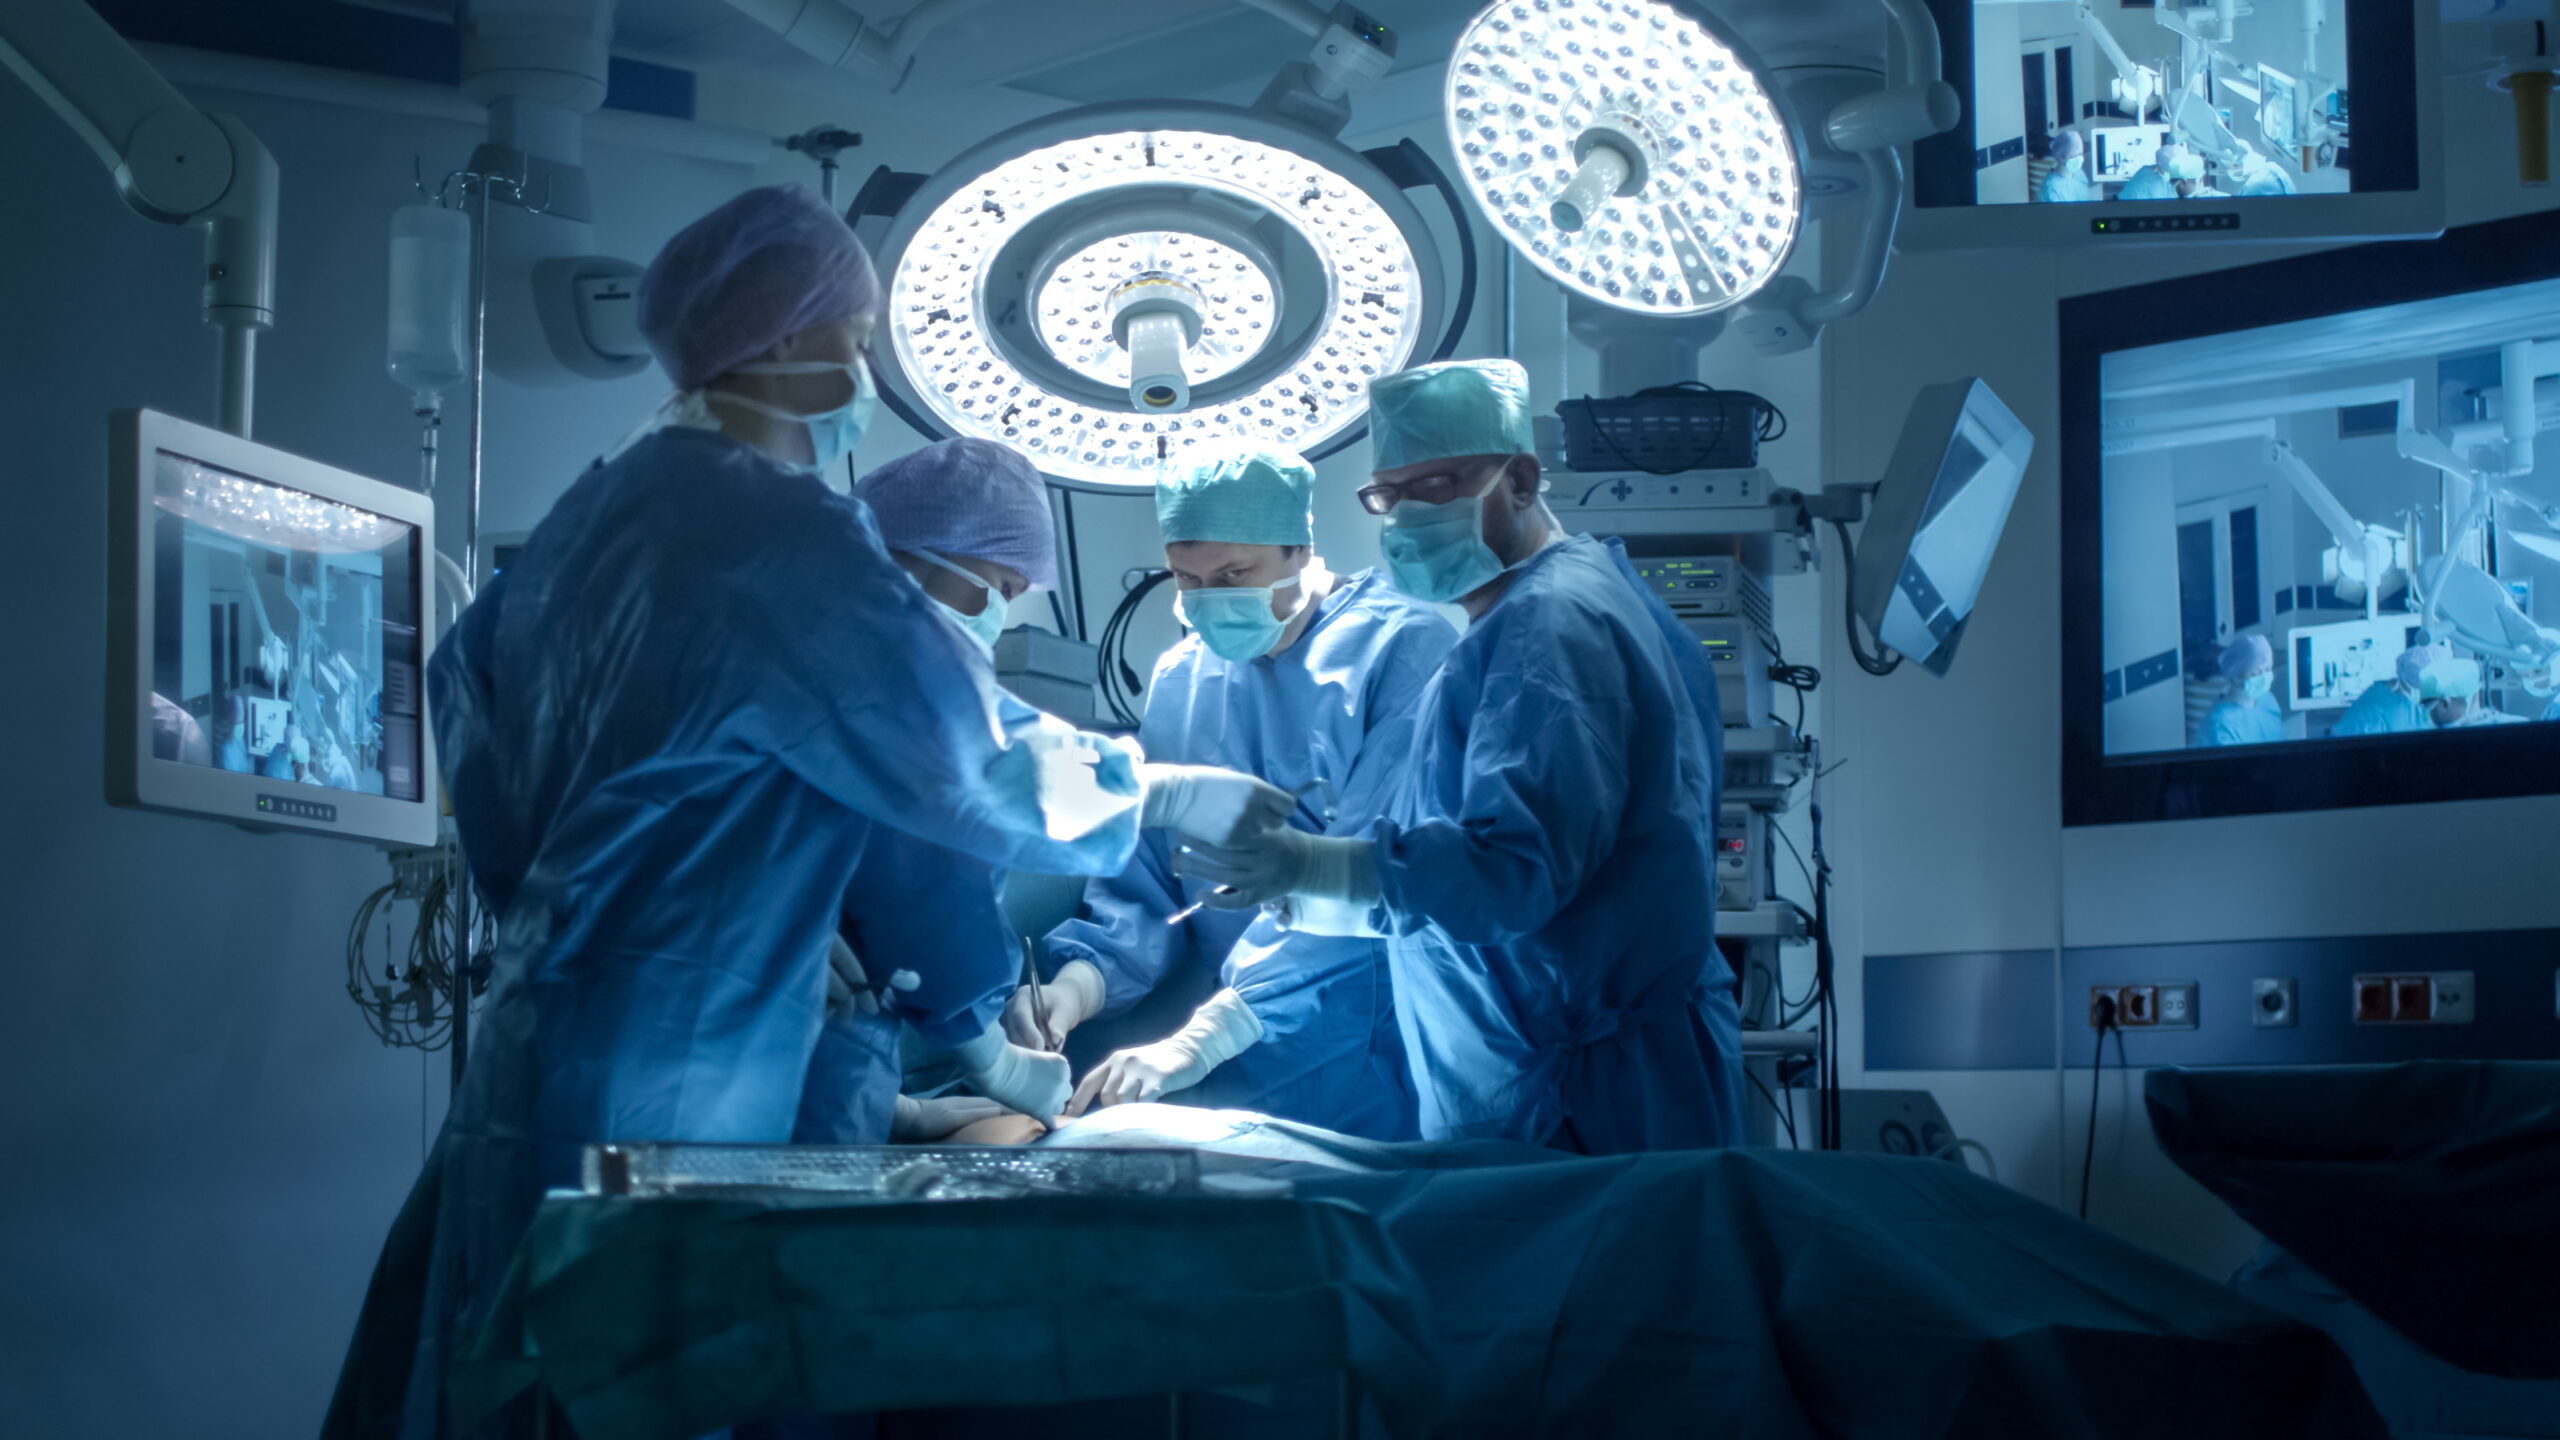 Four surgeons in an operating room with surgical screens in the background.